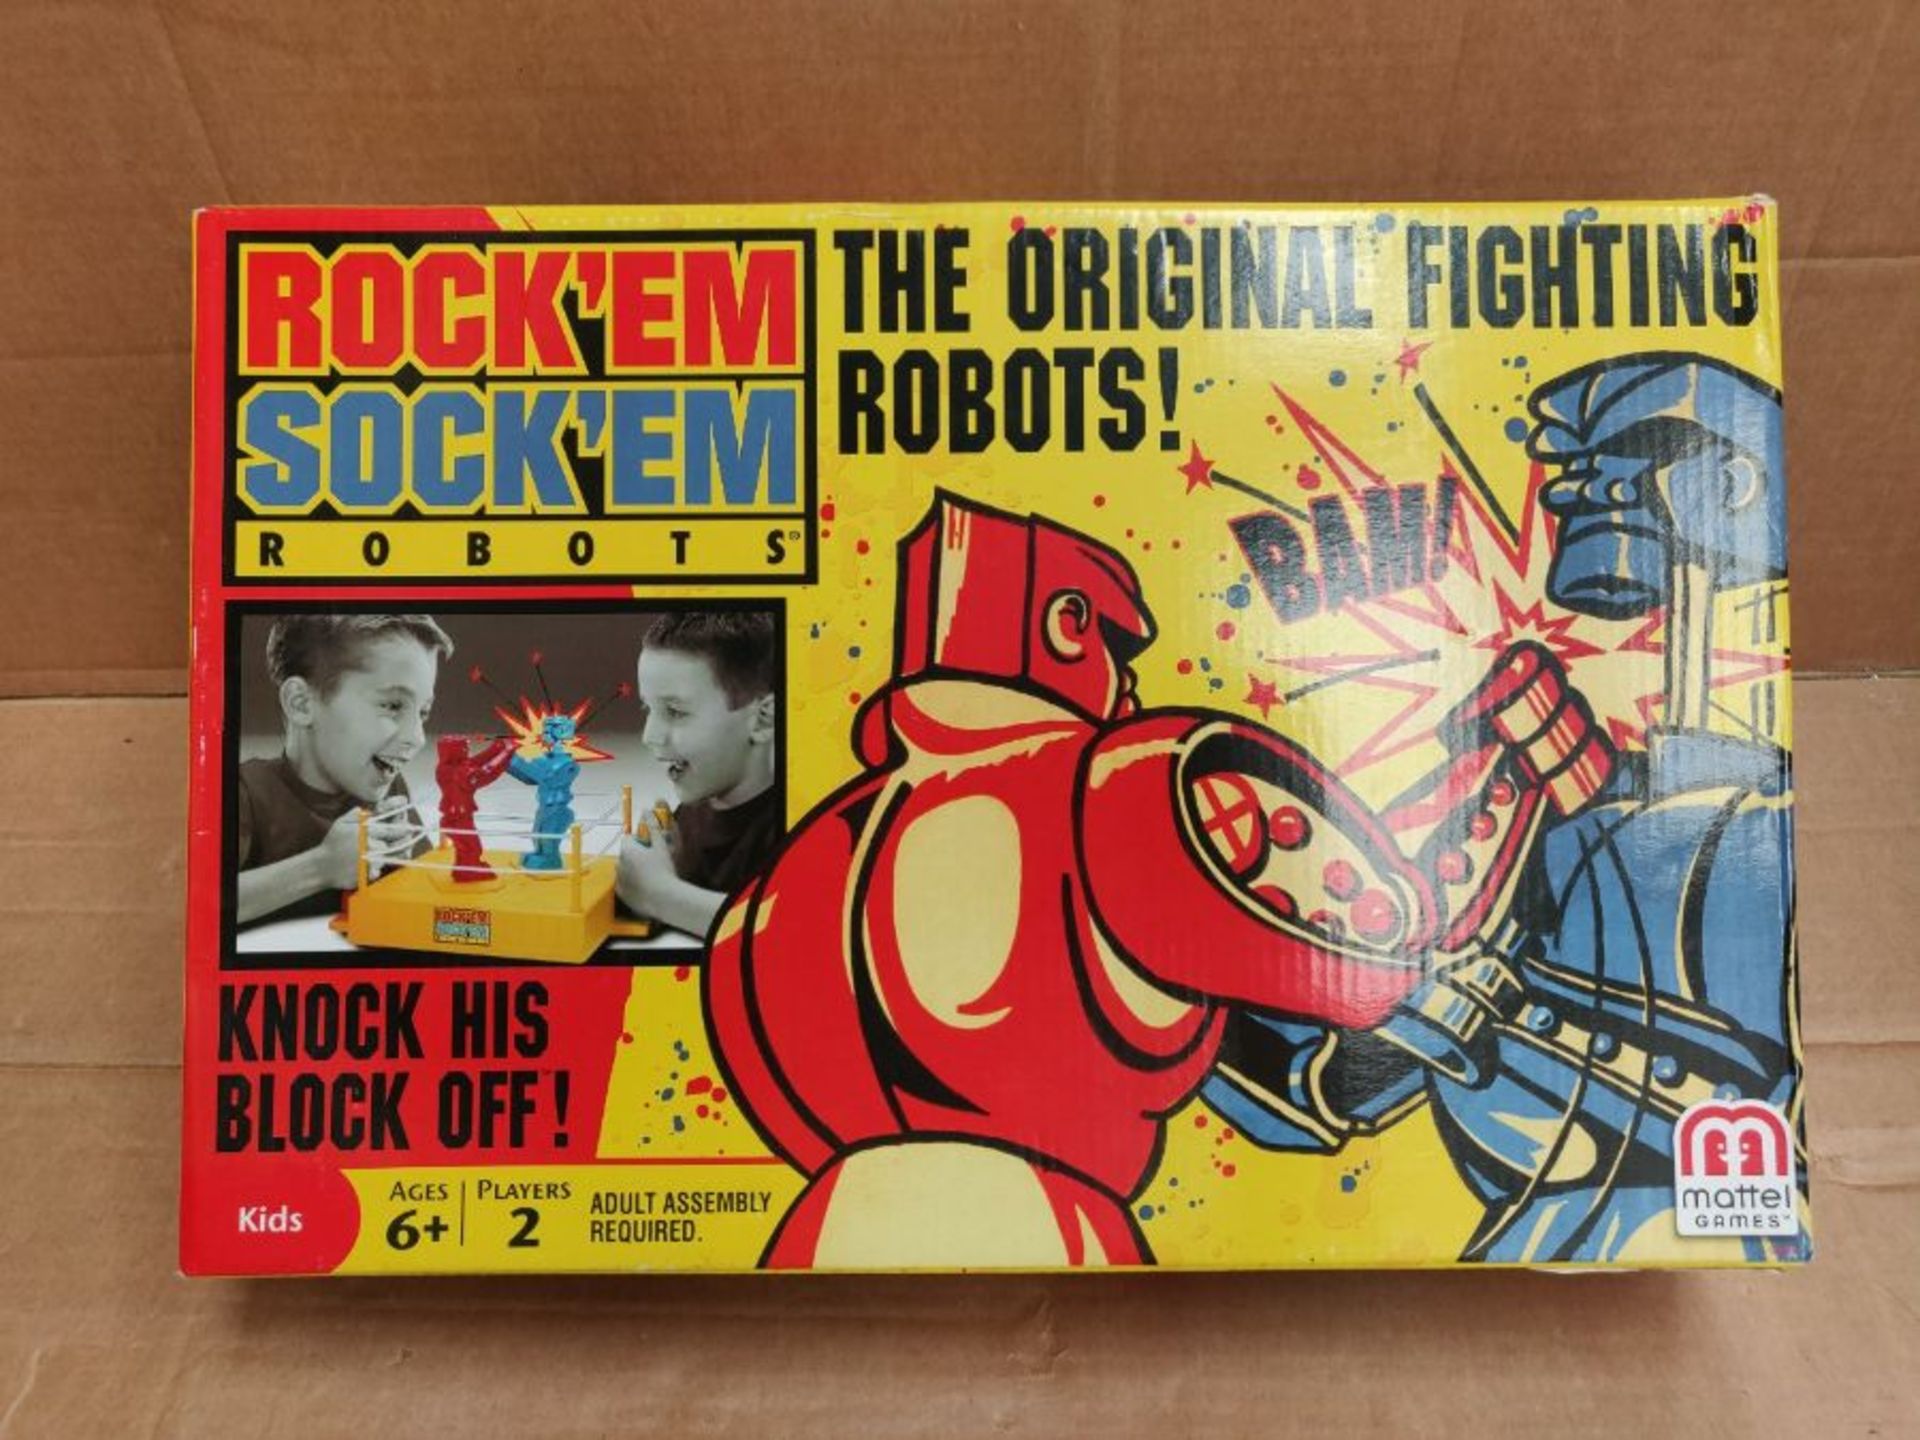 Mattel Games Rock 'Em Sock 'Em Robots Boxing Game for 2 Players Ages 6 Years and Older - Image 2 of 3